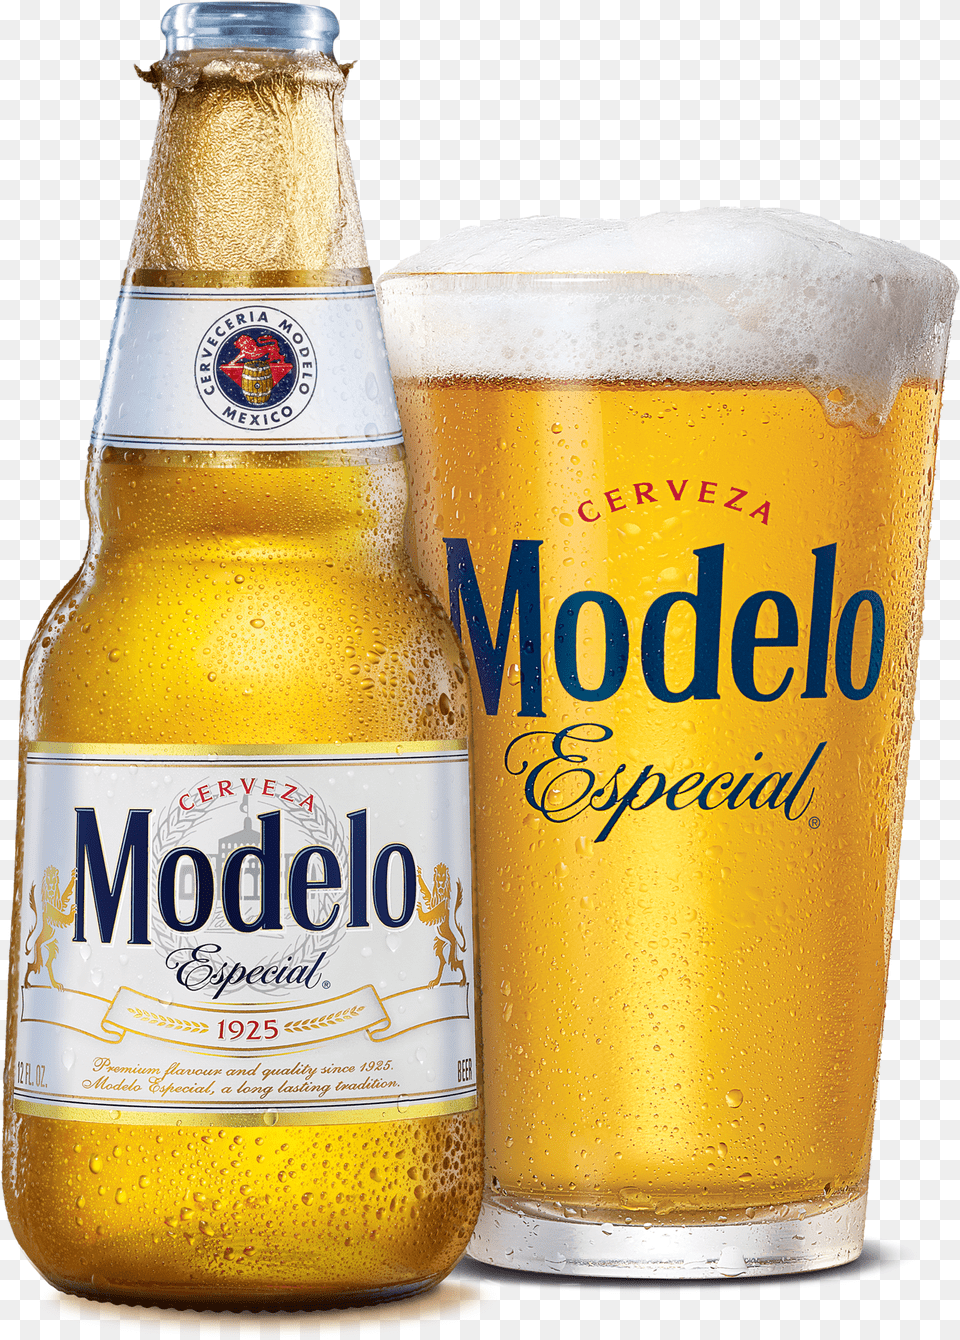 Download Free Modelo Beer Modelo Especial Png Image